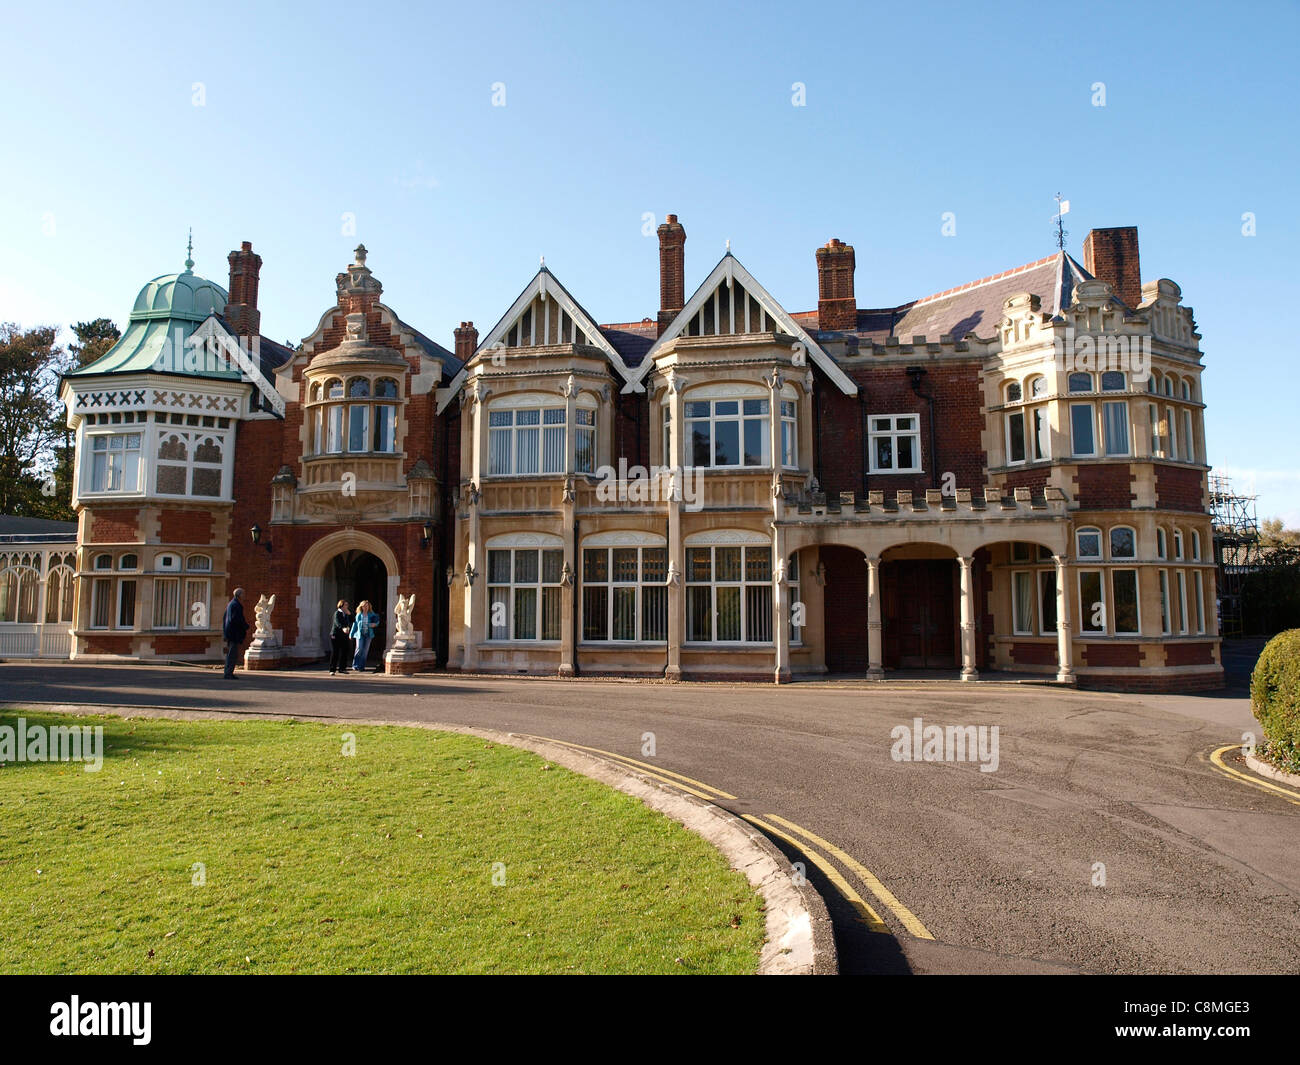 The Mansion, Bletchley Park, Bletchley. Home of the WWII codebreakers who cracked Enigma and other codes. Stock Photo